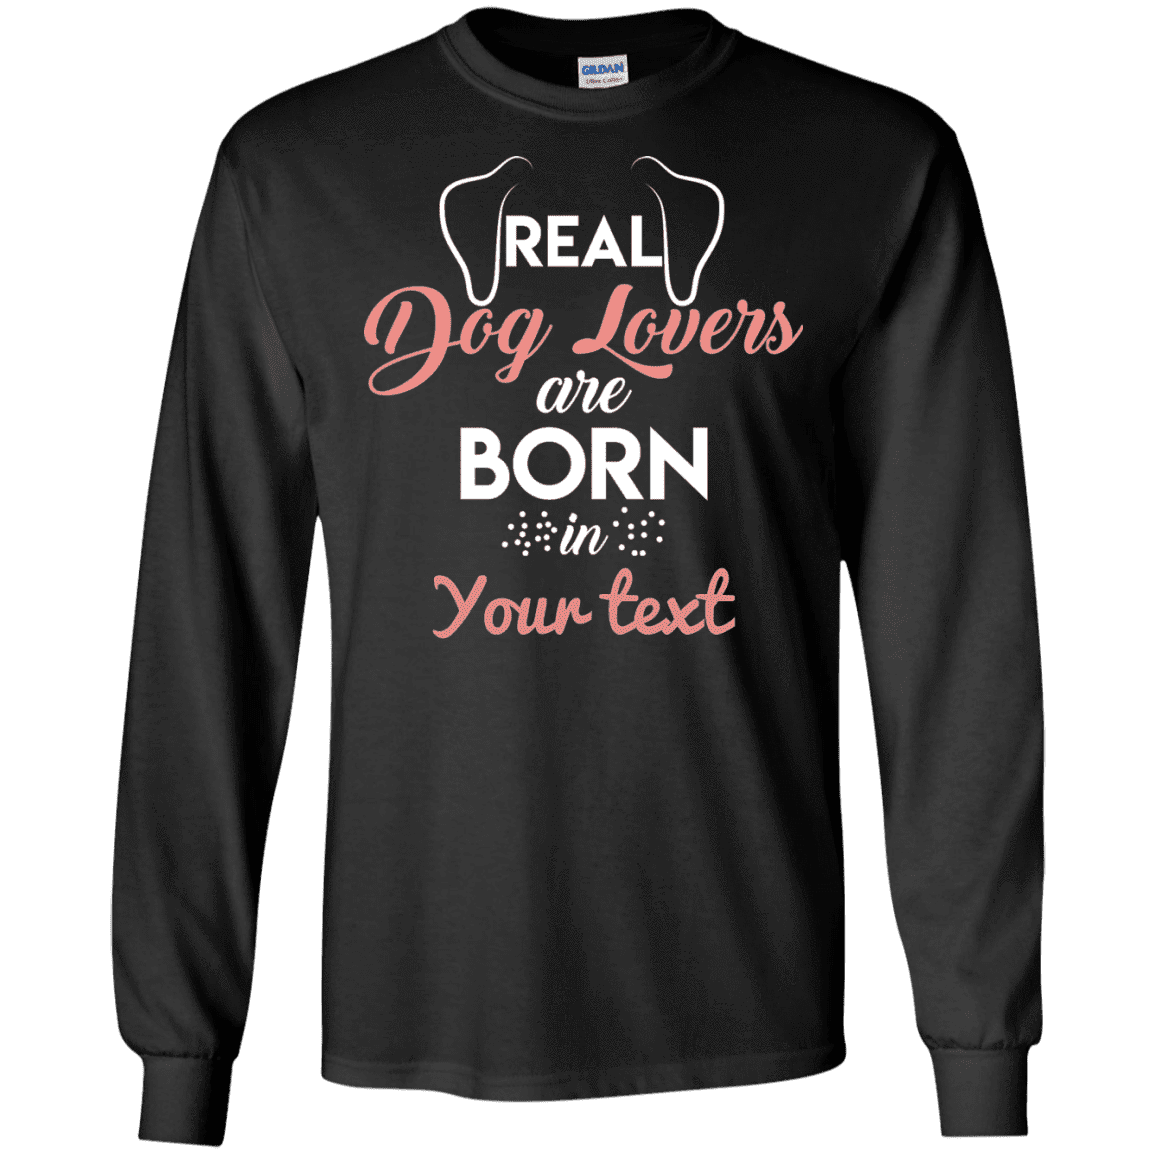 Personalized Real Dog Lovers - Long Sleeve T-Shirt.